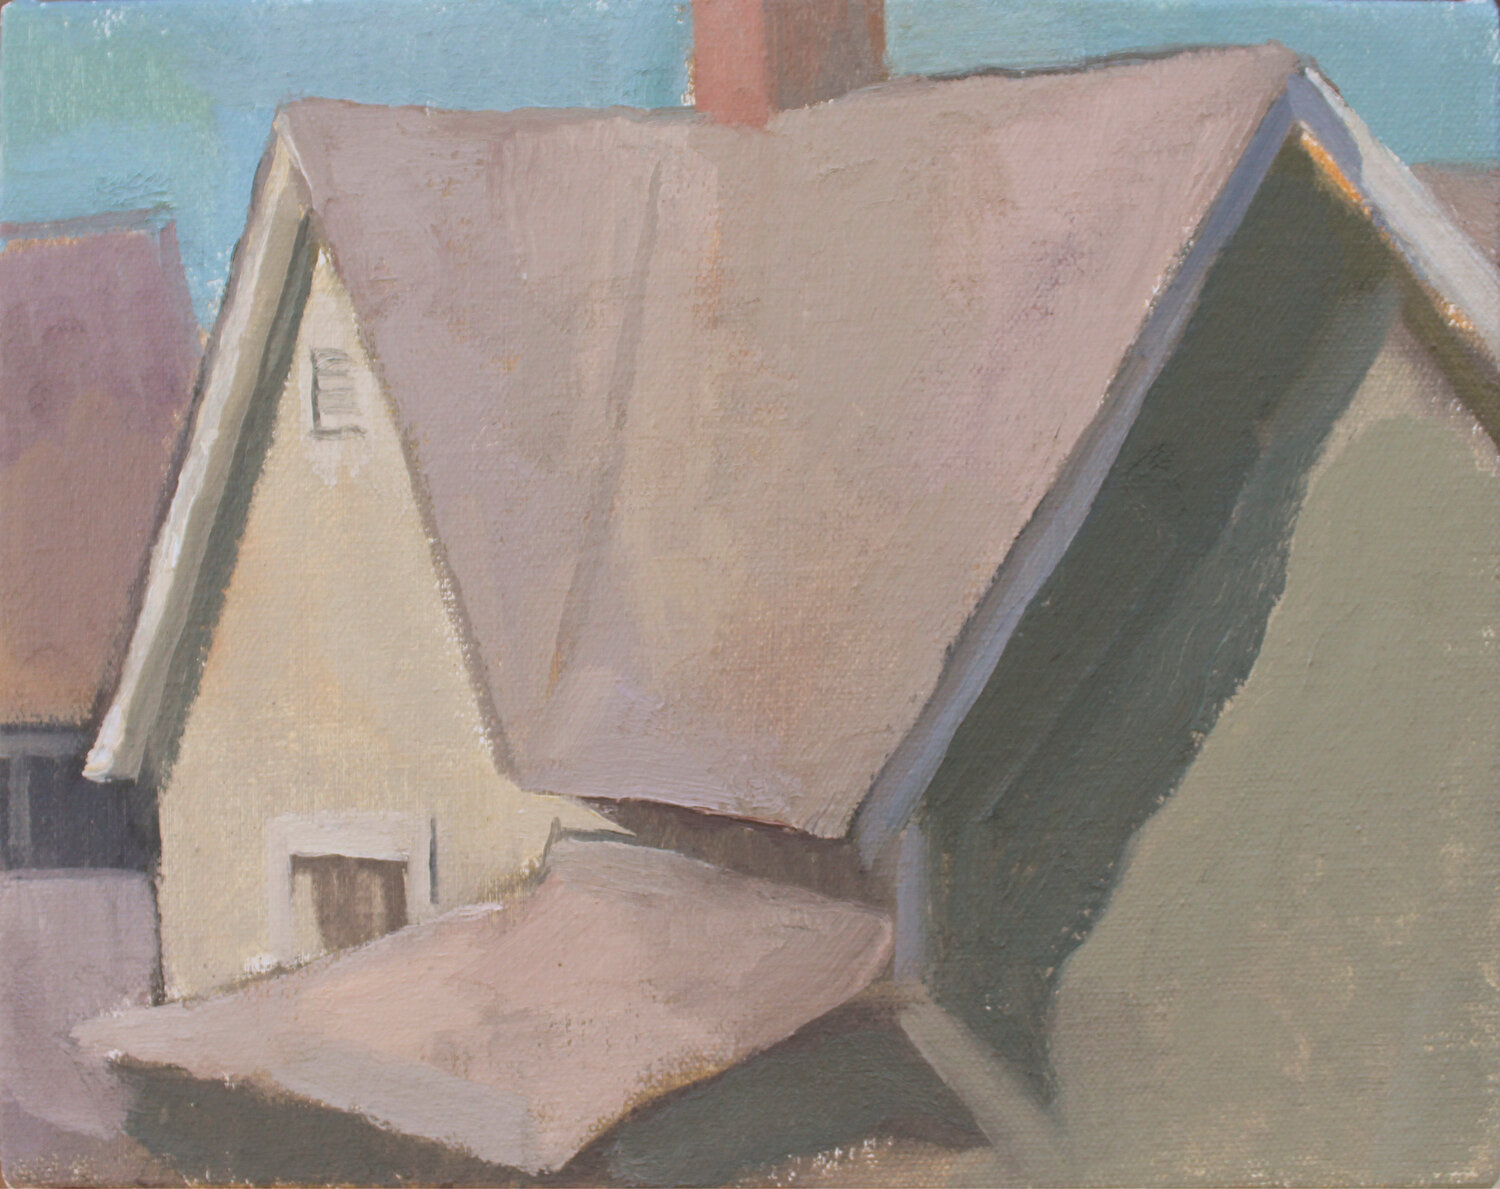 “Cupcake Houses” is an oil on canvas by artist Michelle Farro, part of her contemporary landscape paintings exhibition at Green Building Center in Lambertville, N.J.